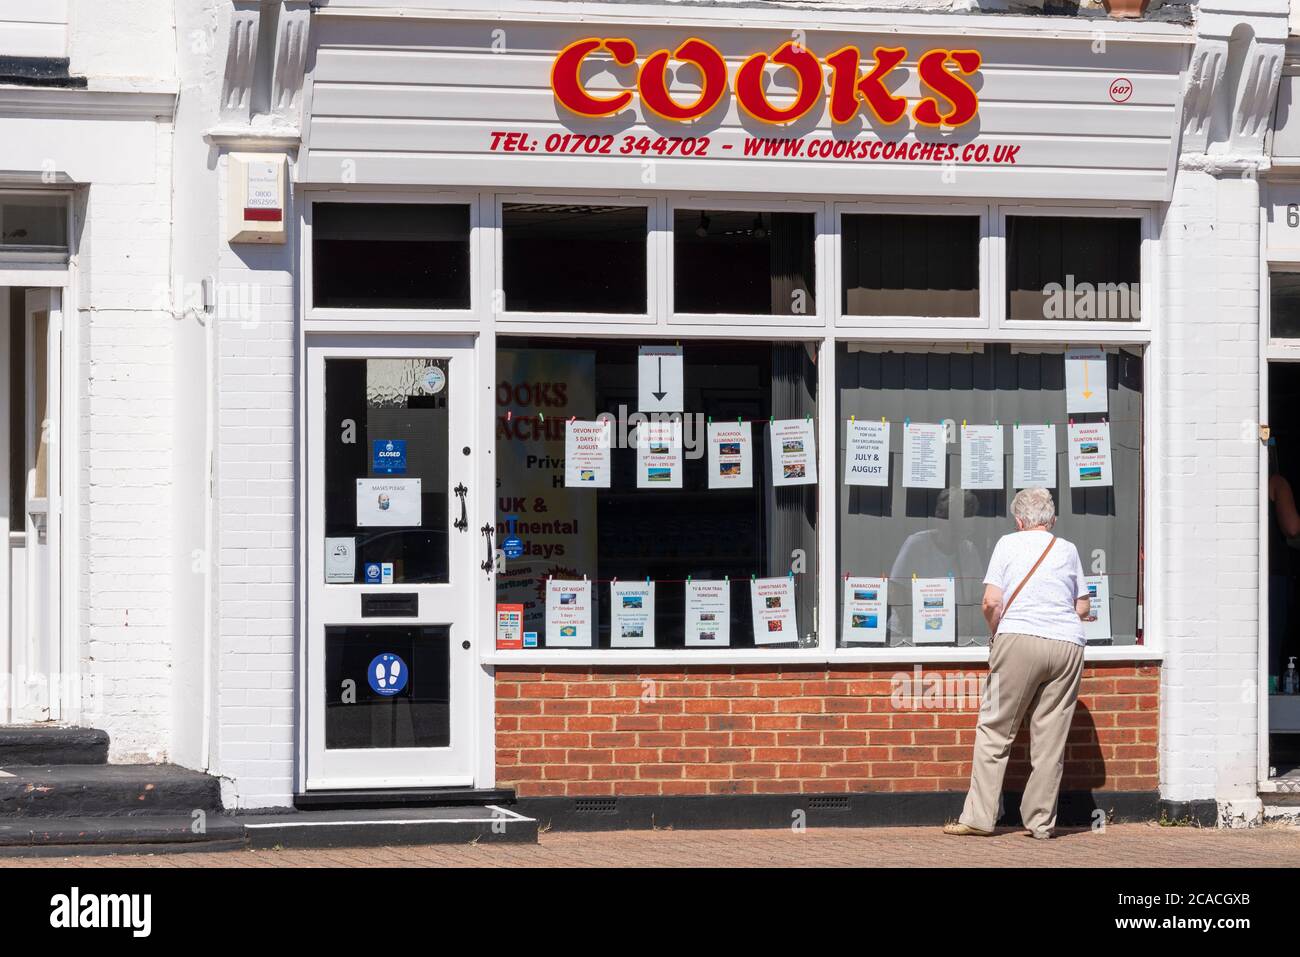 Cooks Coaches office in Westcliff on Sea, Essex, UK, with senior female looking at the window display. Holidays and day excursions travel business Stock Photo